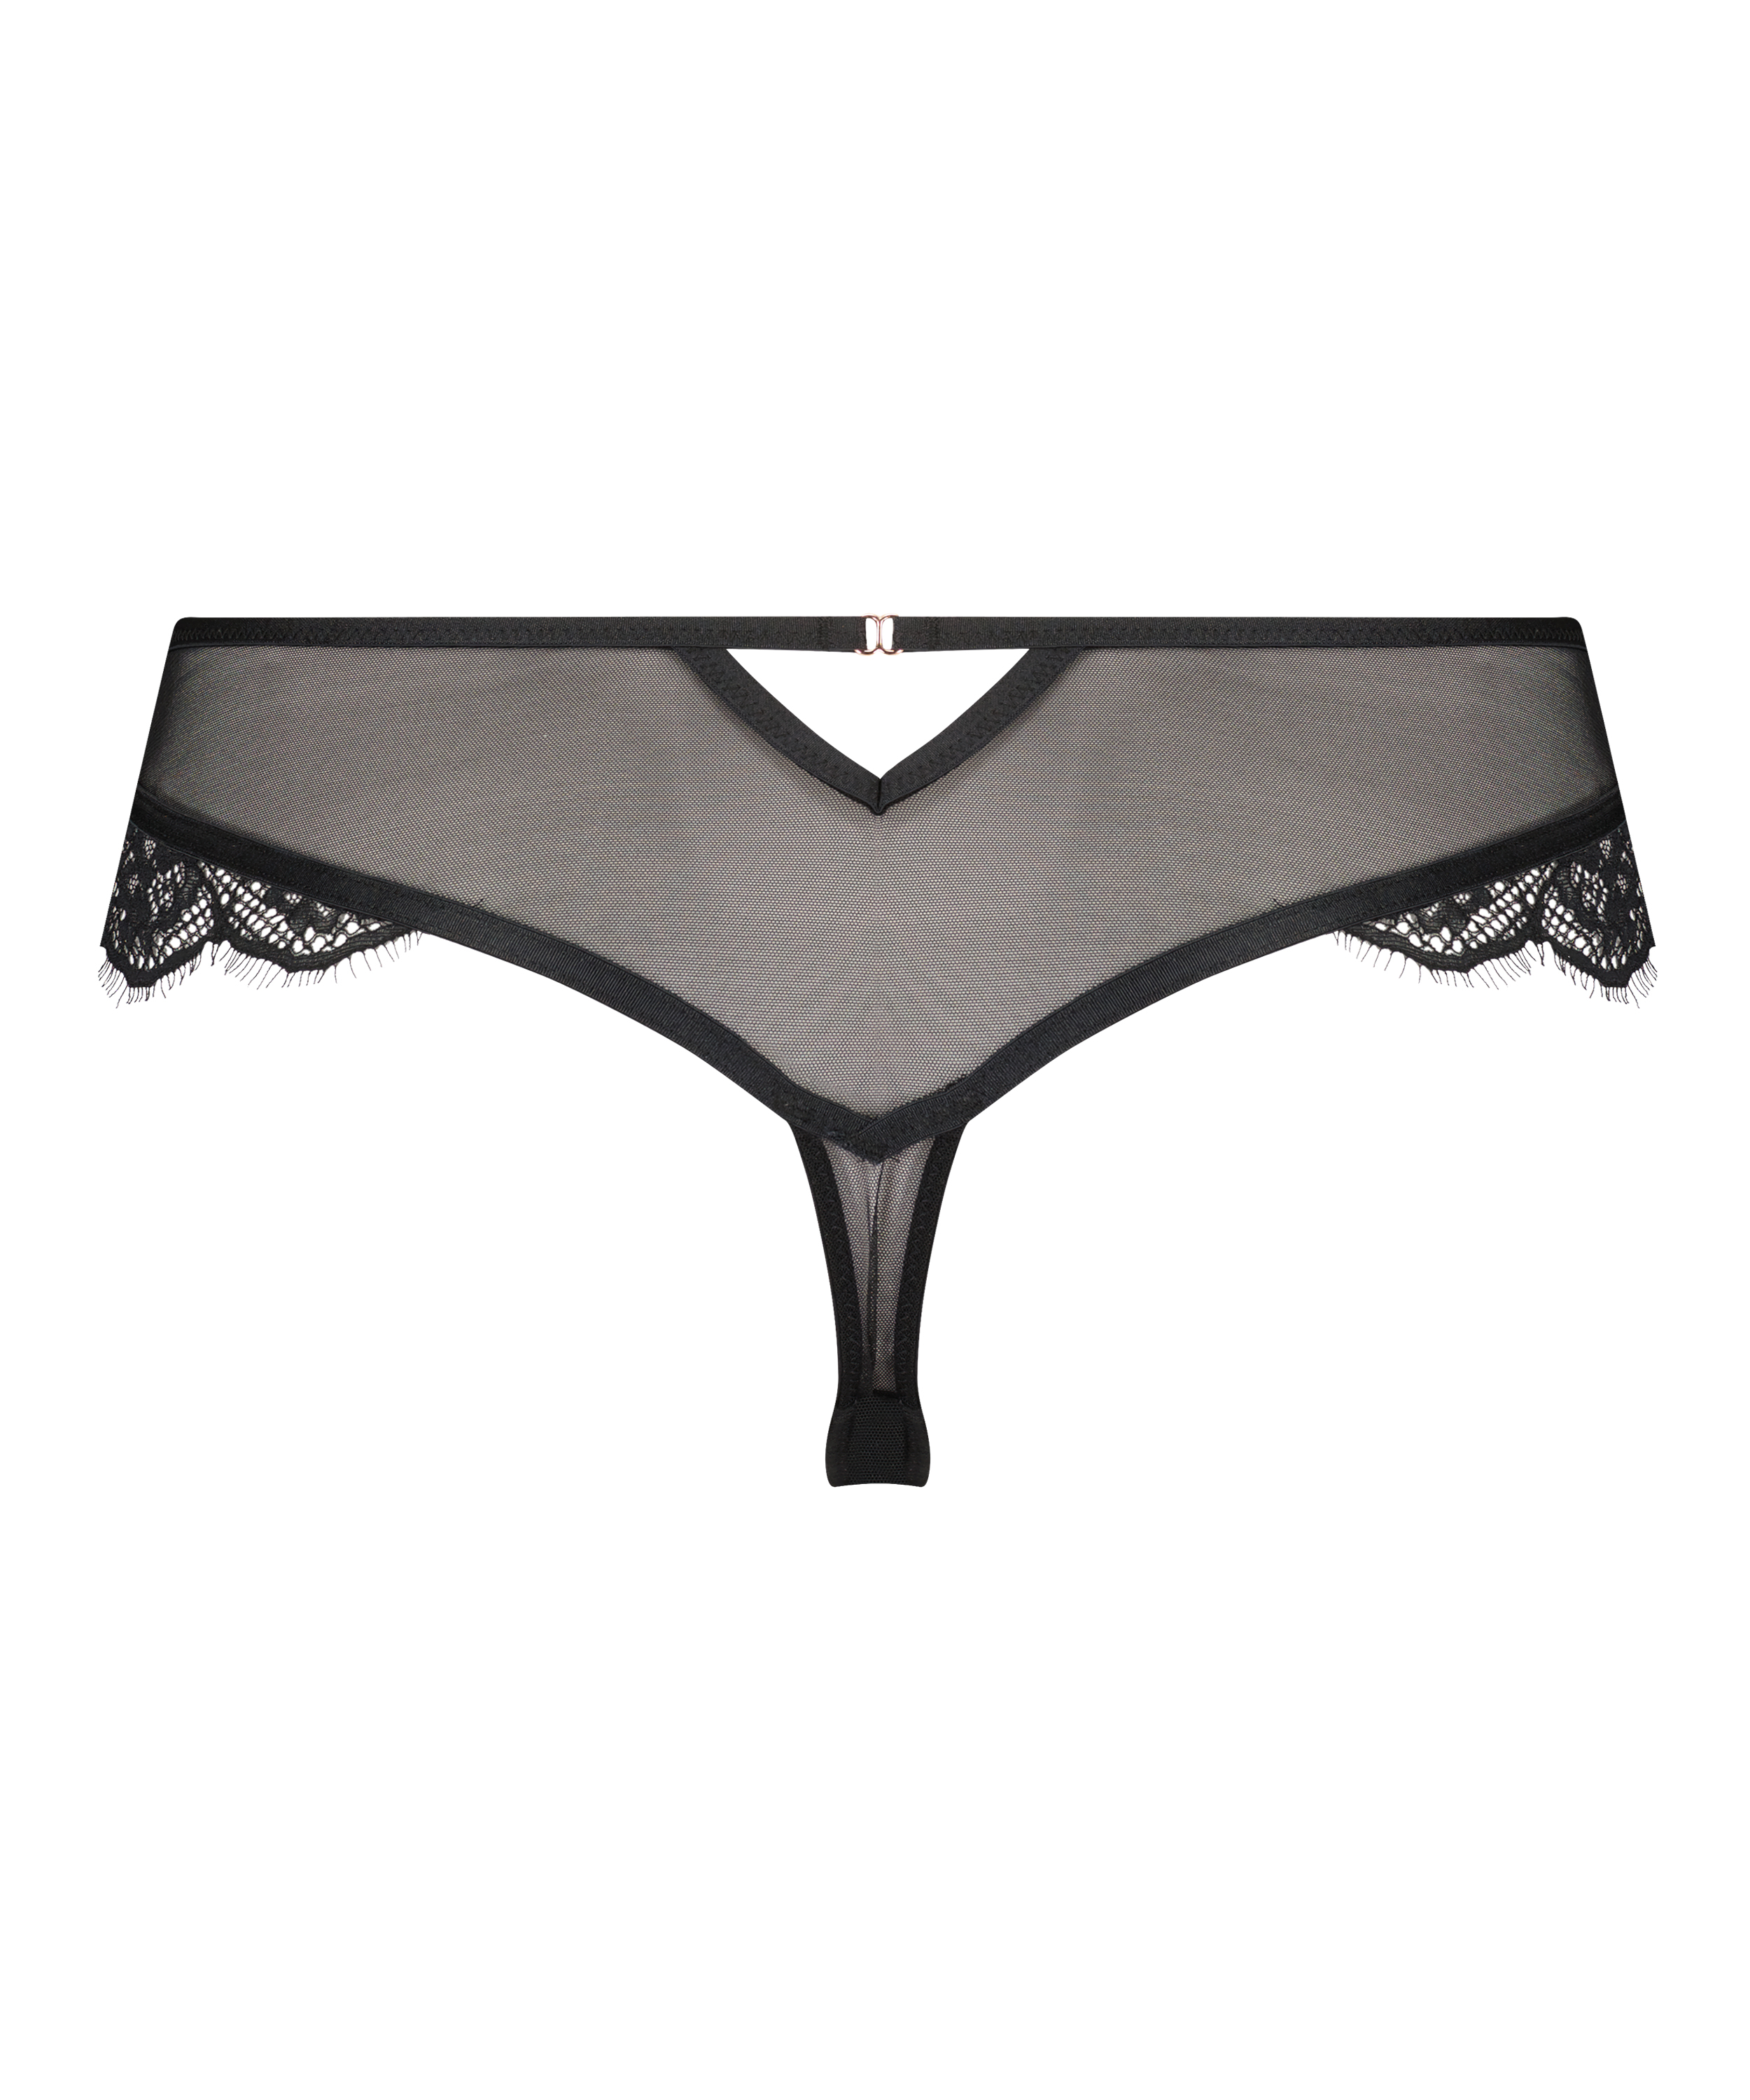 Margaret Thong Boxers Lucy Hale, Black, main